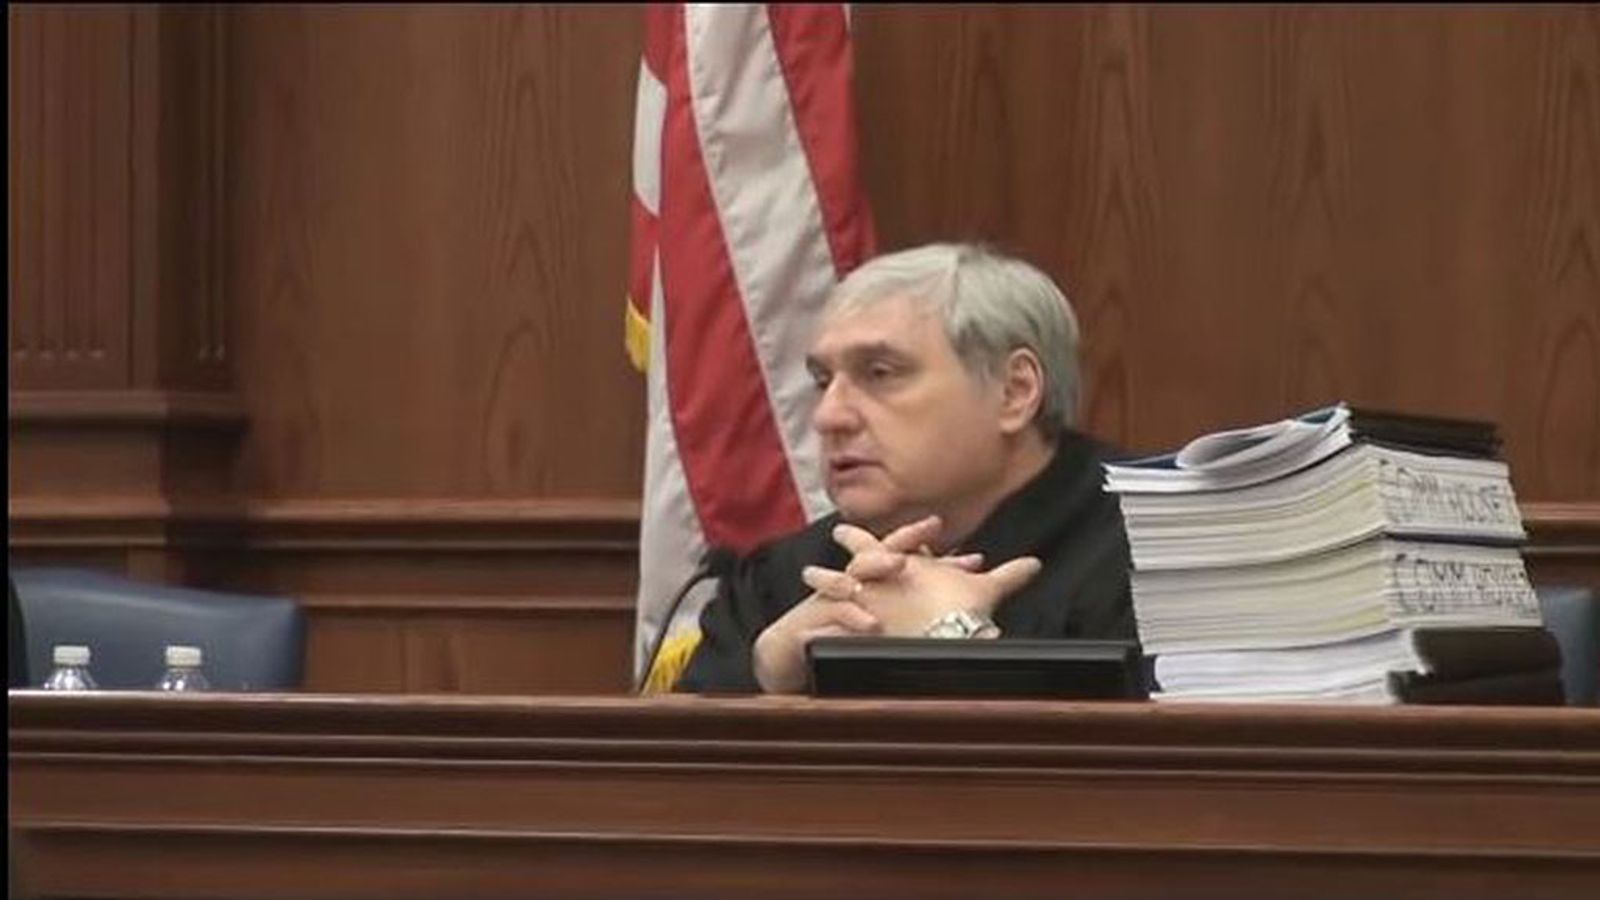 9th Circuit's Alex Kozinski Facing Porn-Based Misconduct Charges